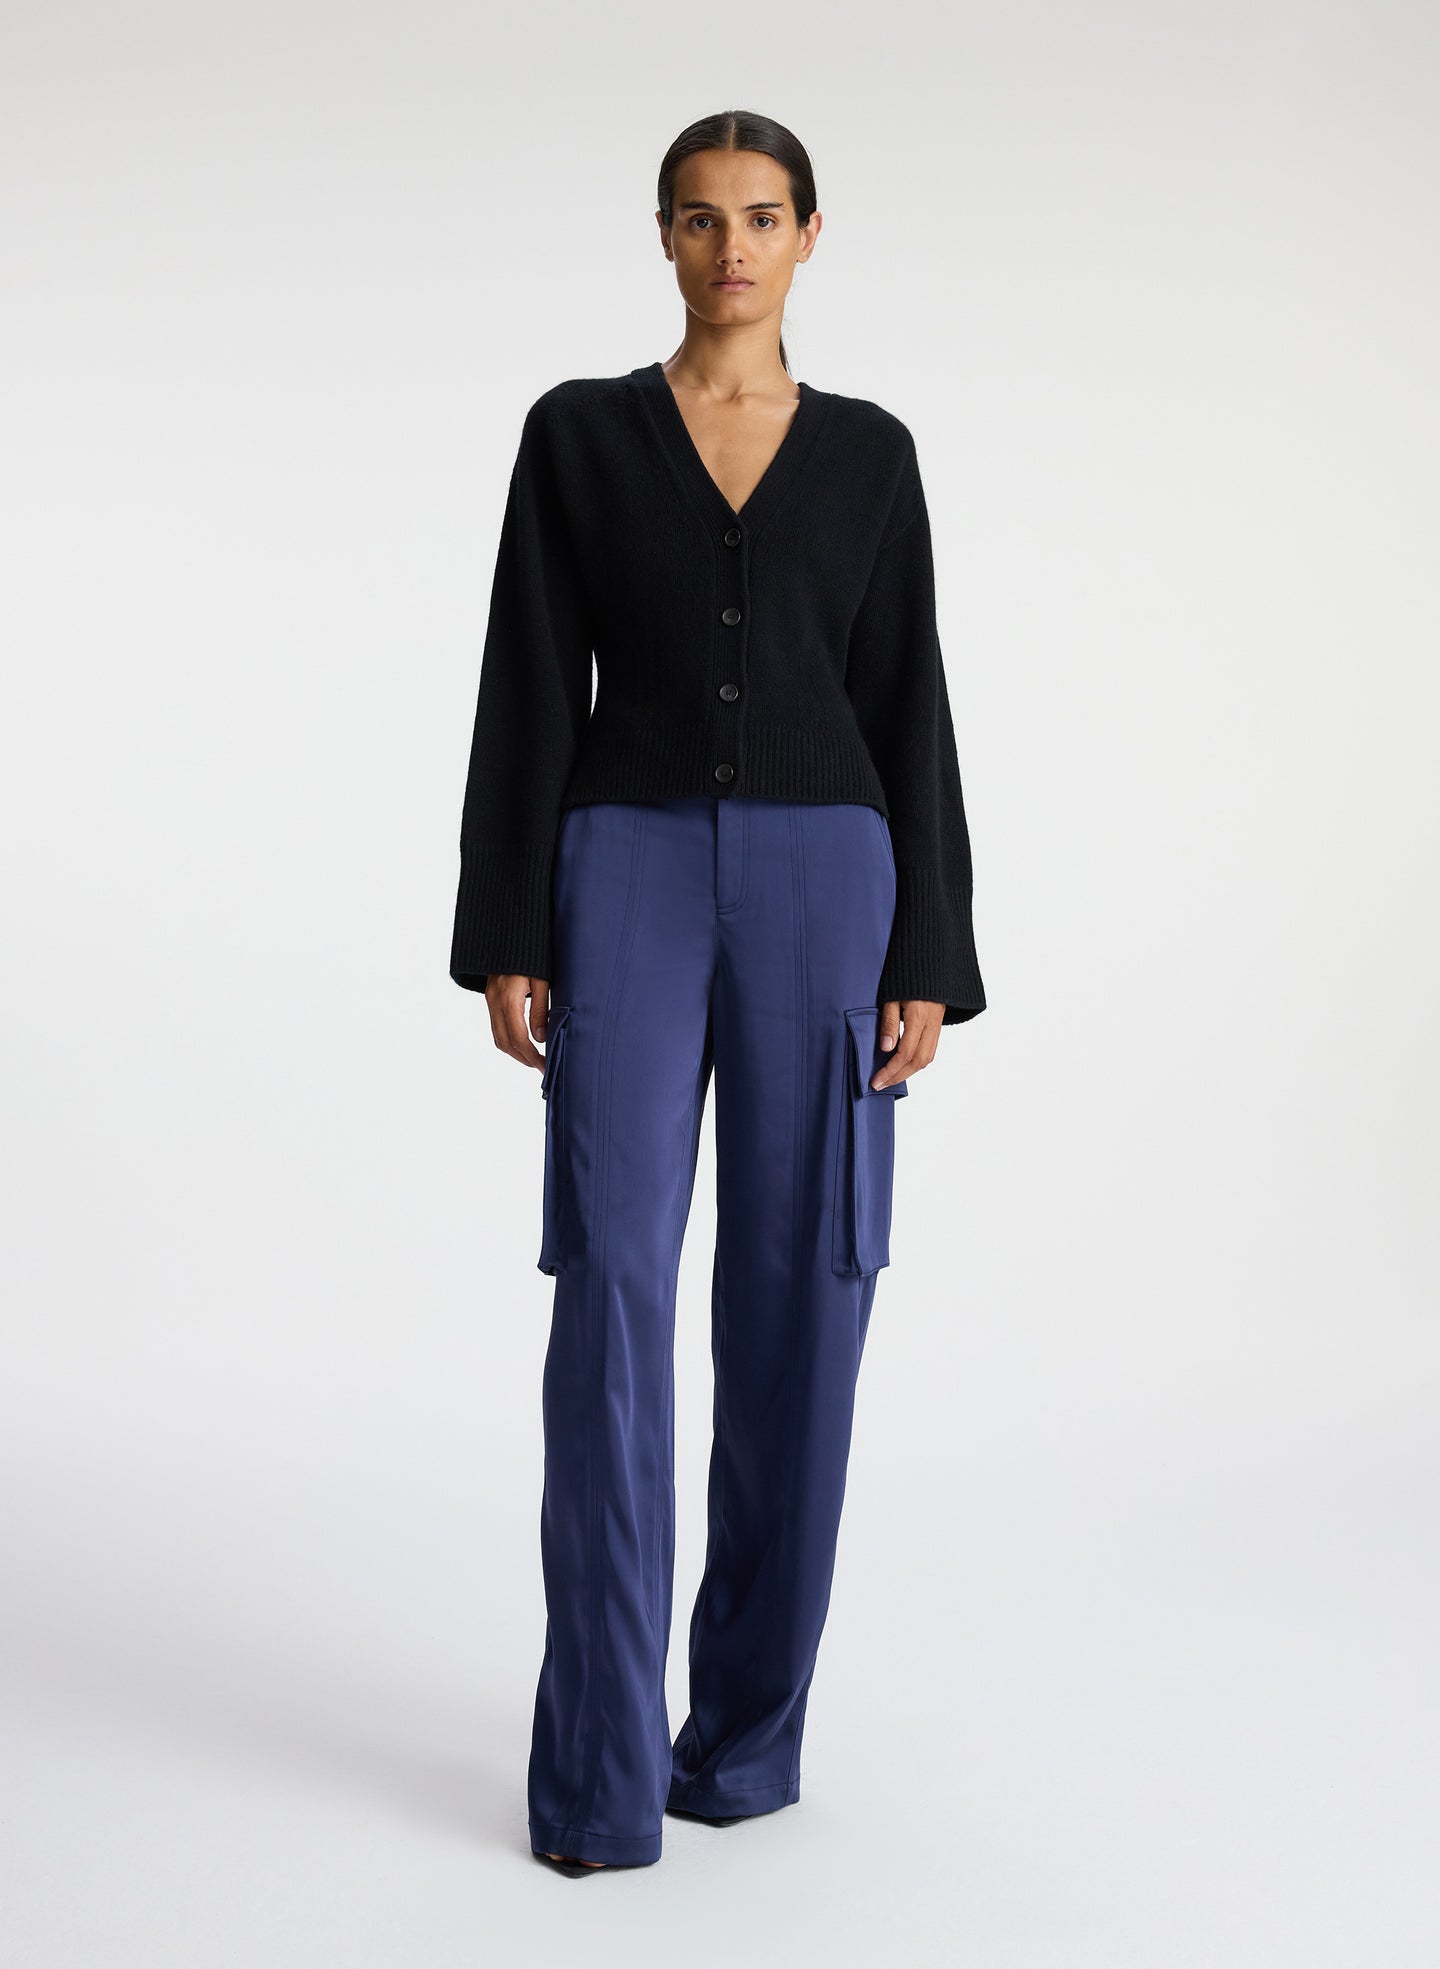 front view of woman wearing black cardigan with navy blue cargo pants